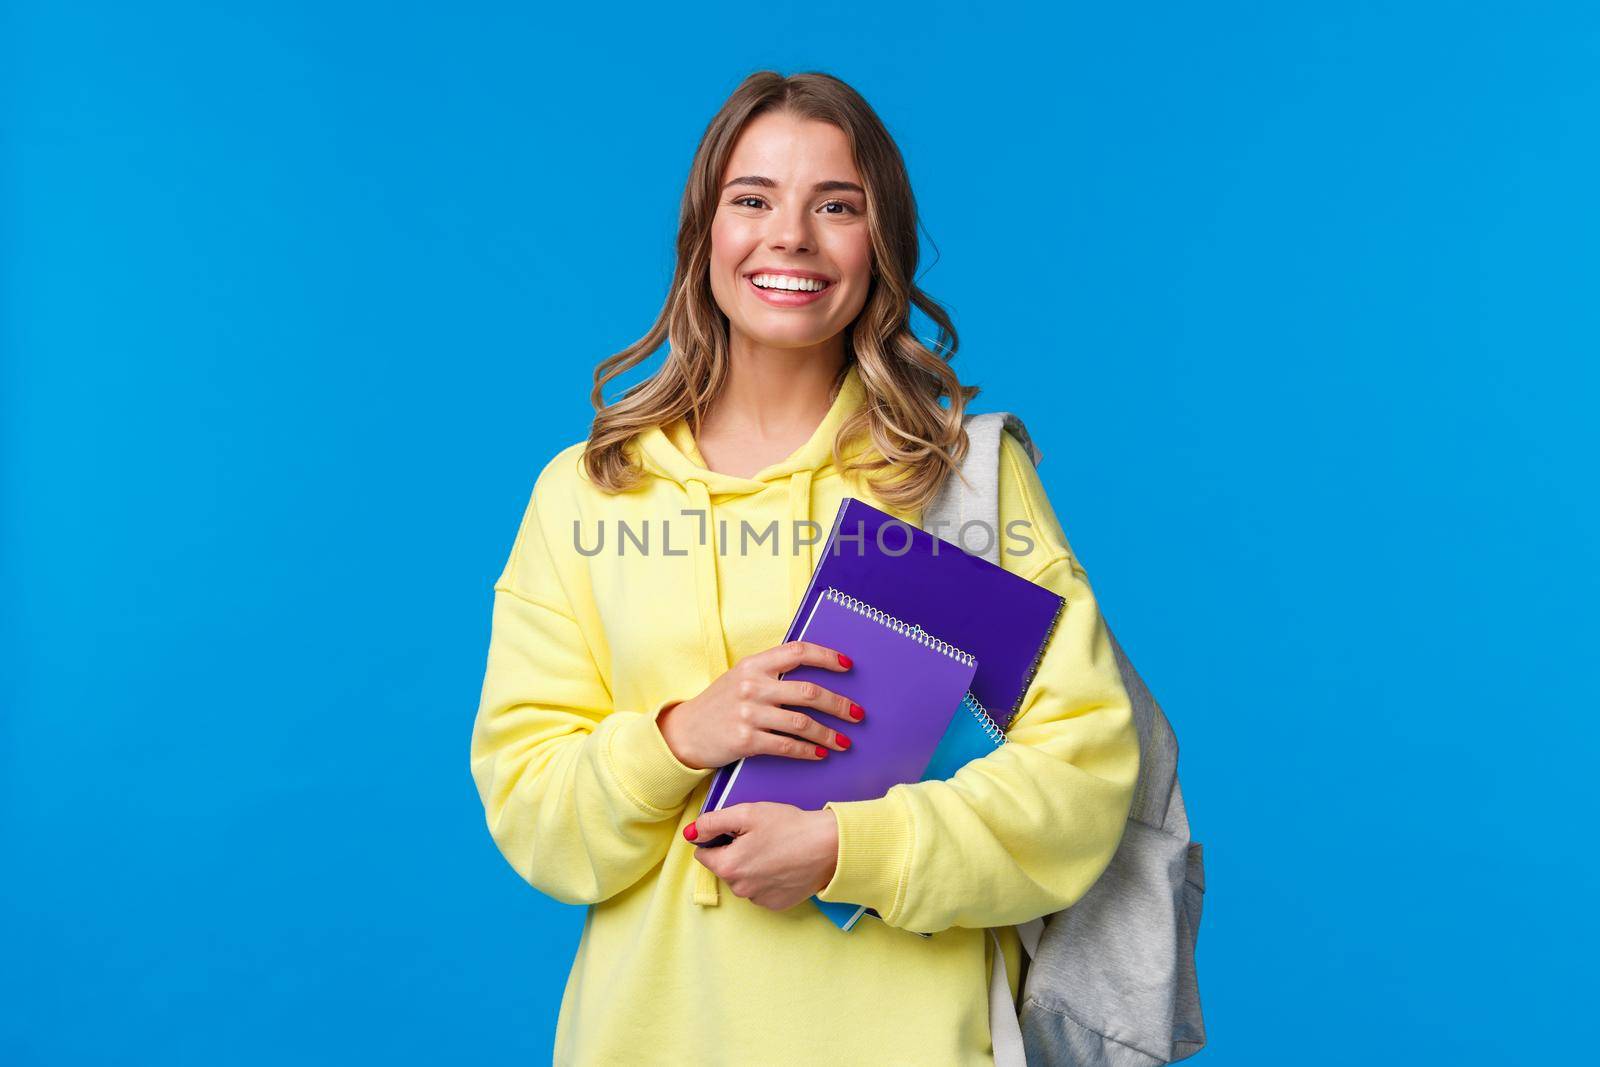 Cheerful pretty blond girl smiling at camera, carry backpack and notebooks, papers for studying, learning new language at courses, standing joyful over blue background. Education and people concept